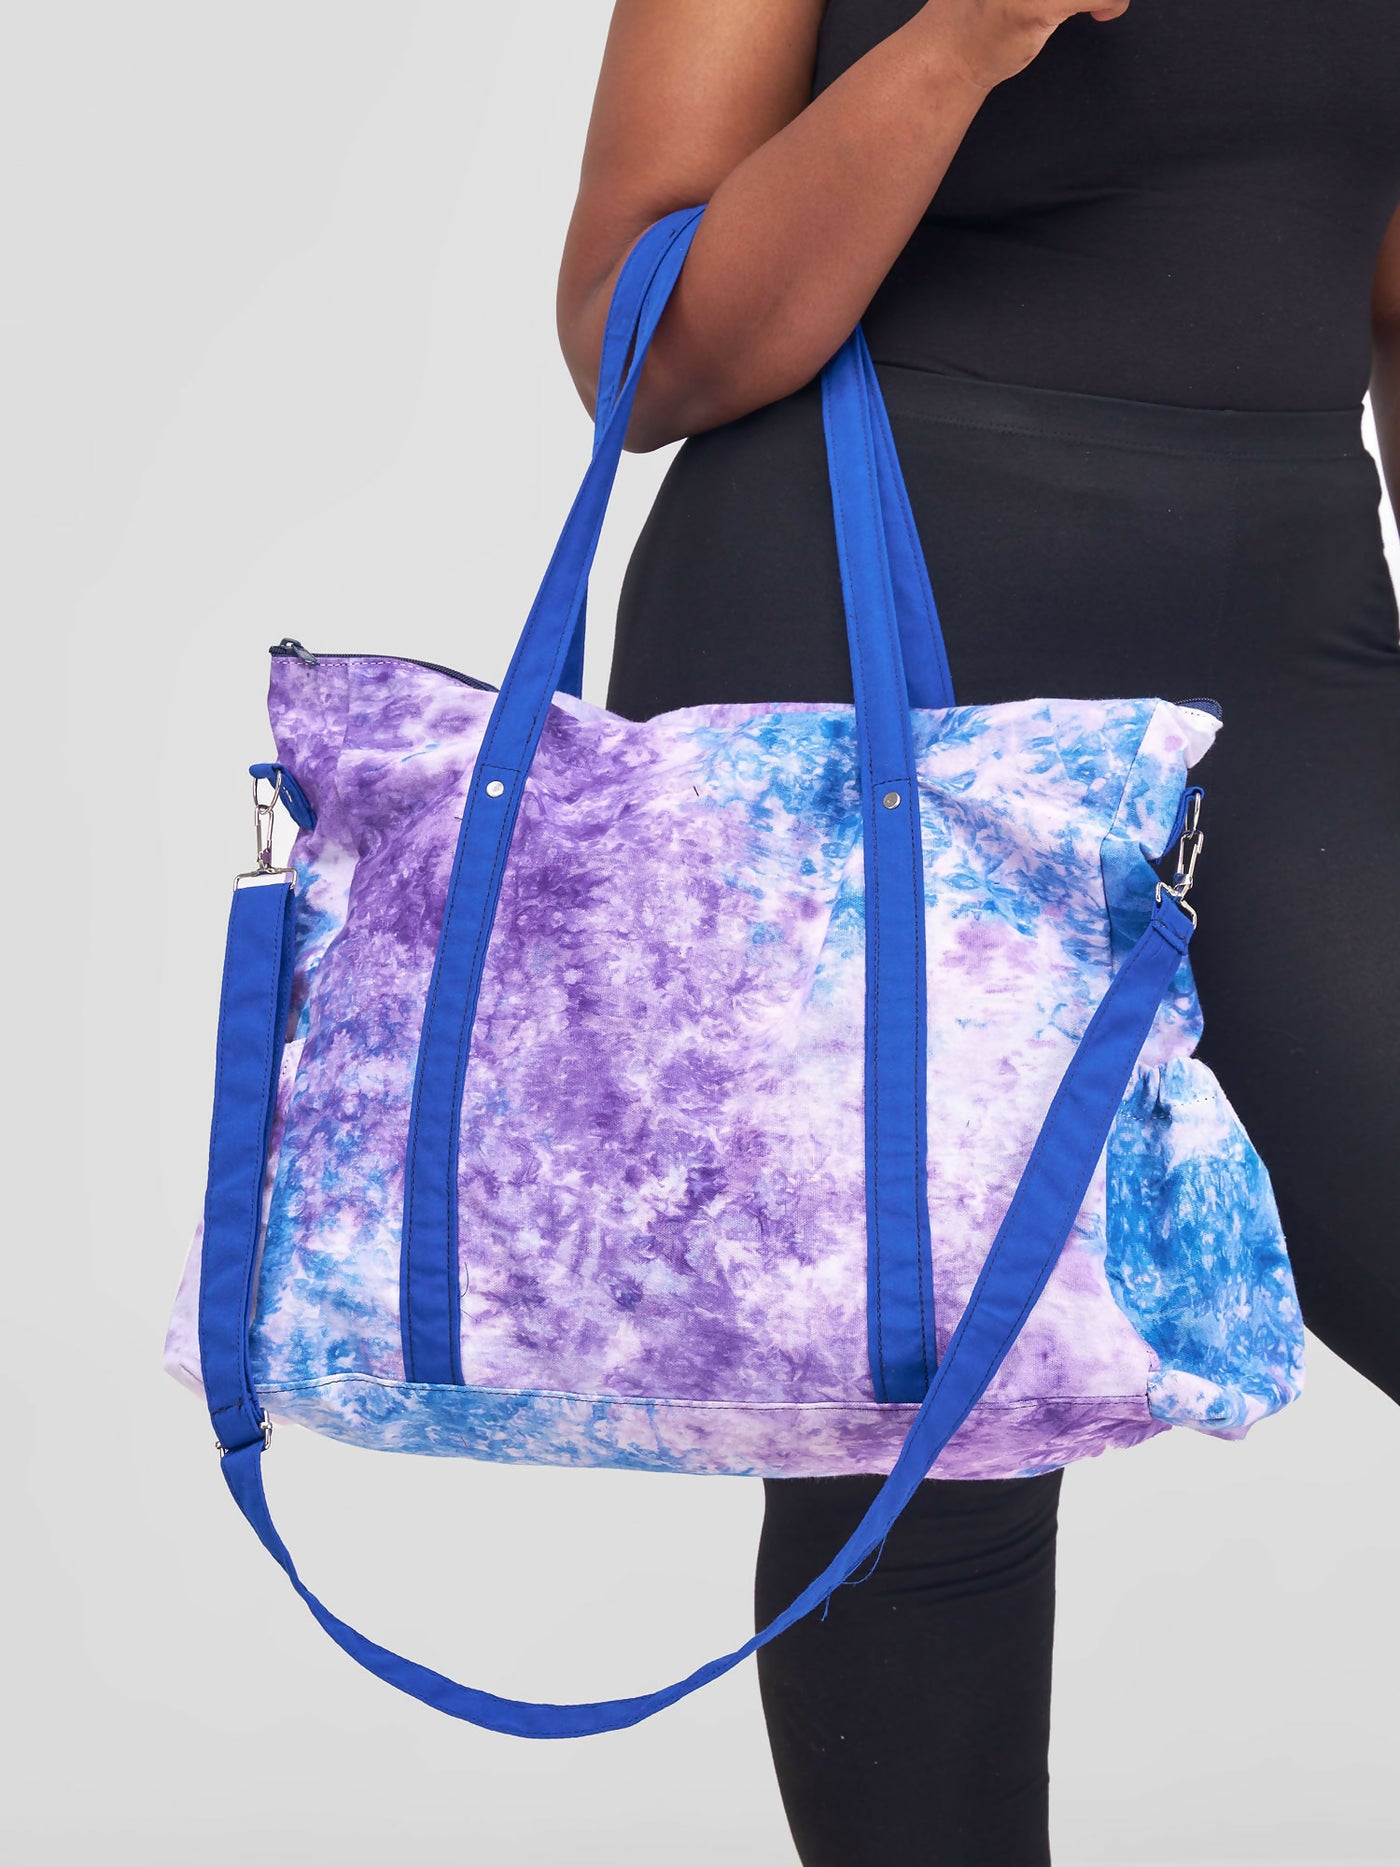 Crafts With Meaning Tie & Dye Diaper Bag - Blue / Purple